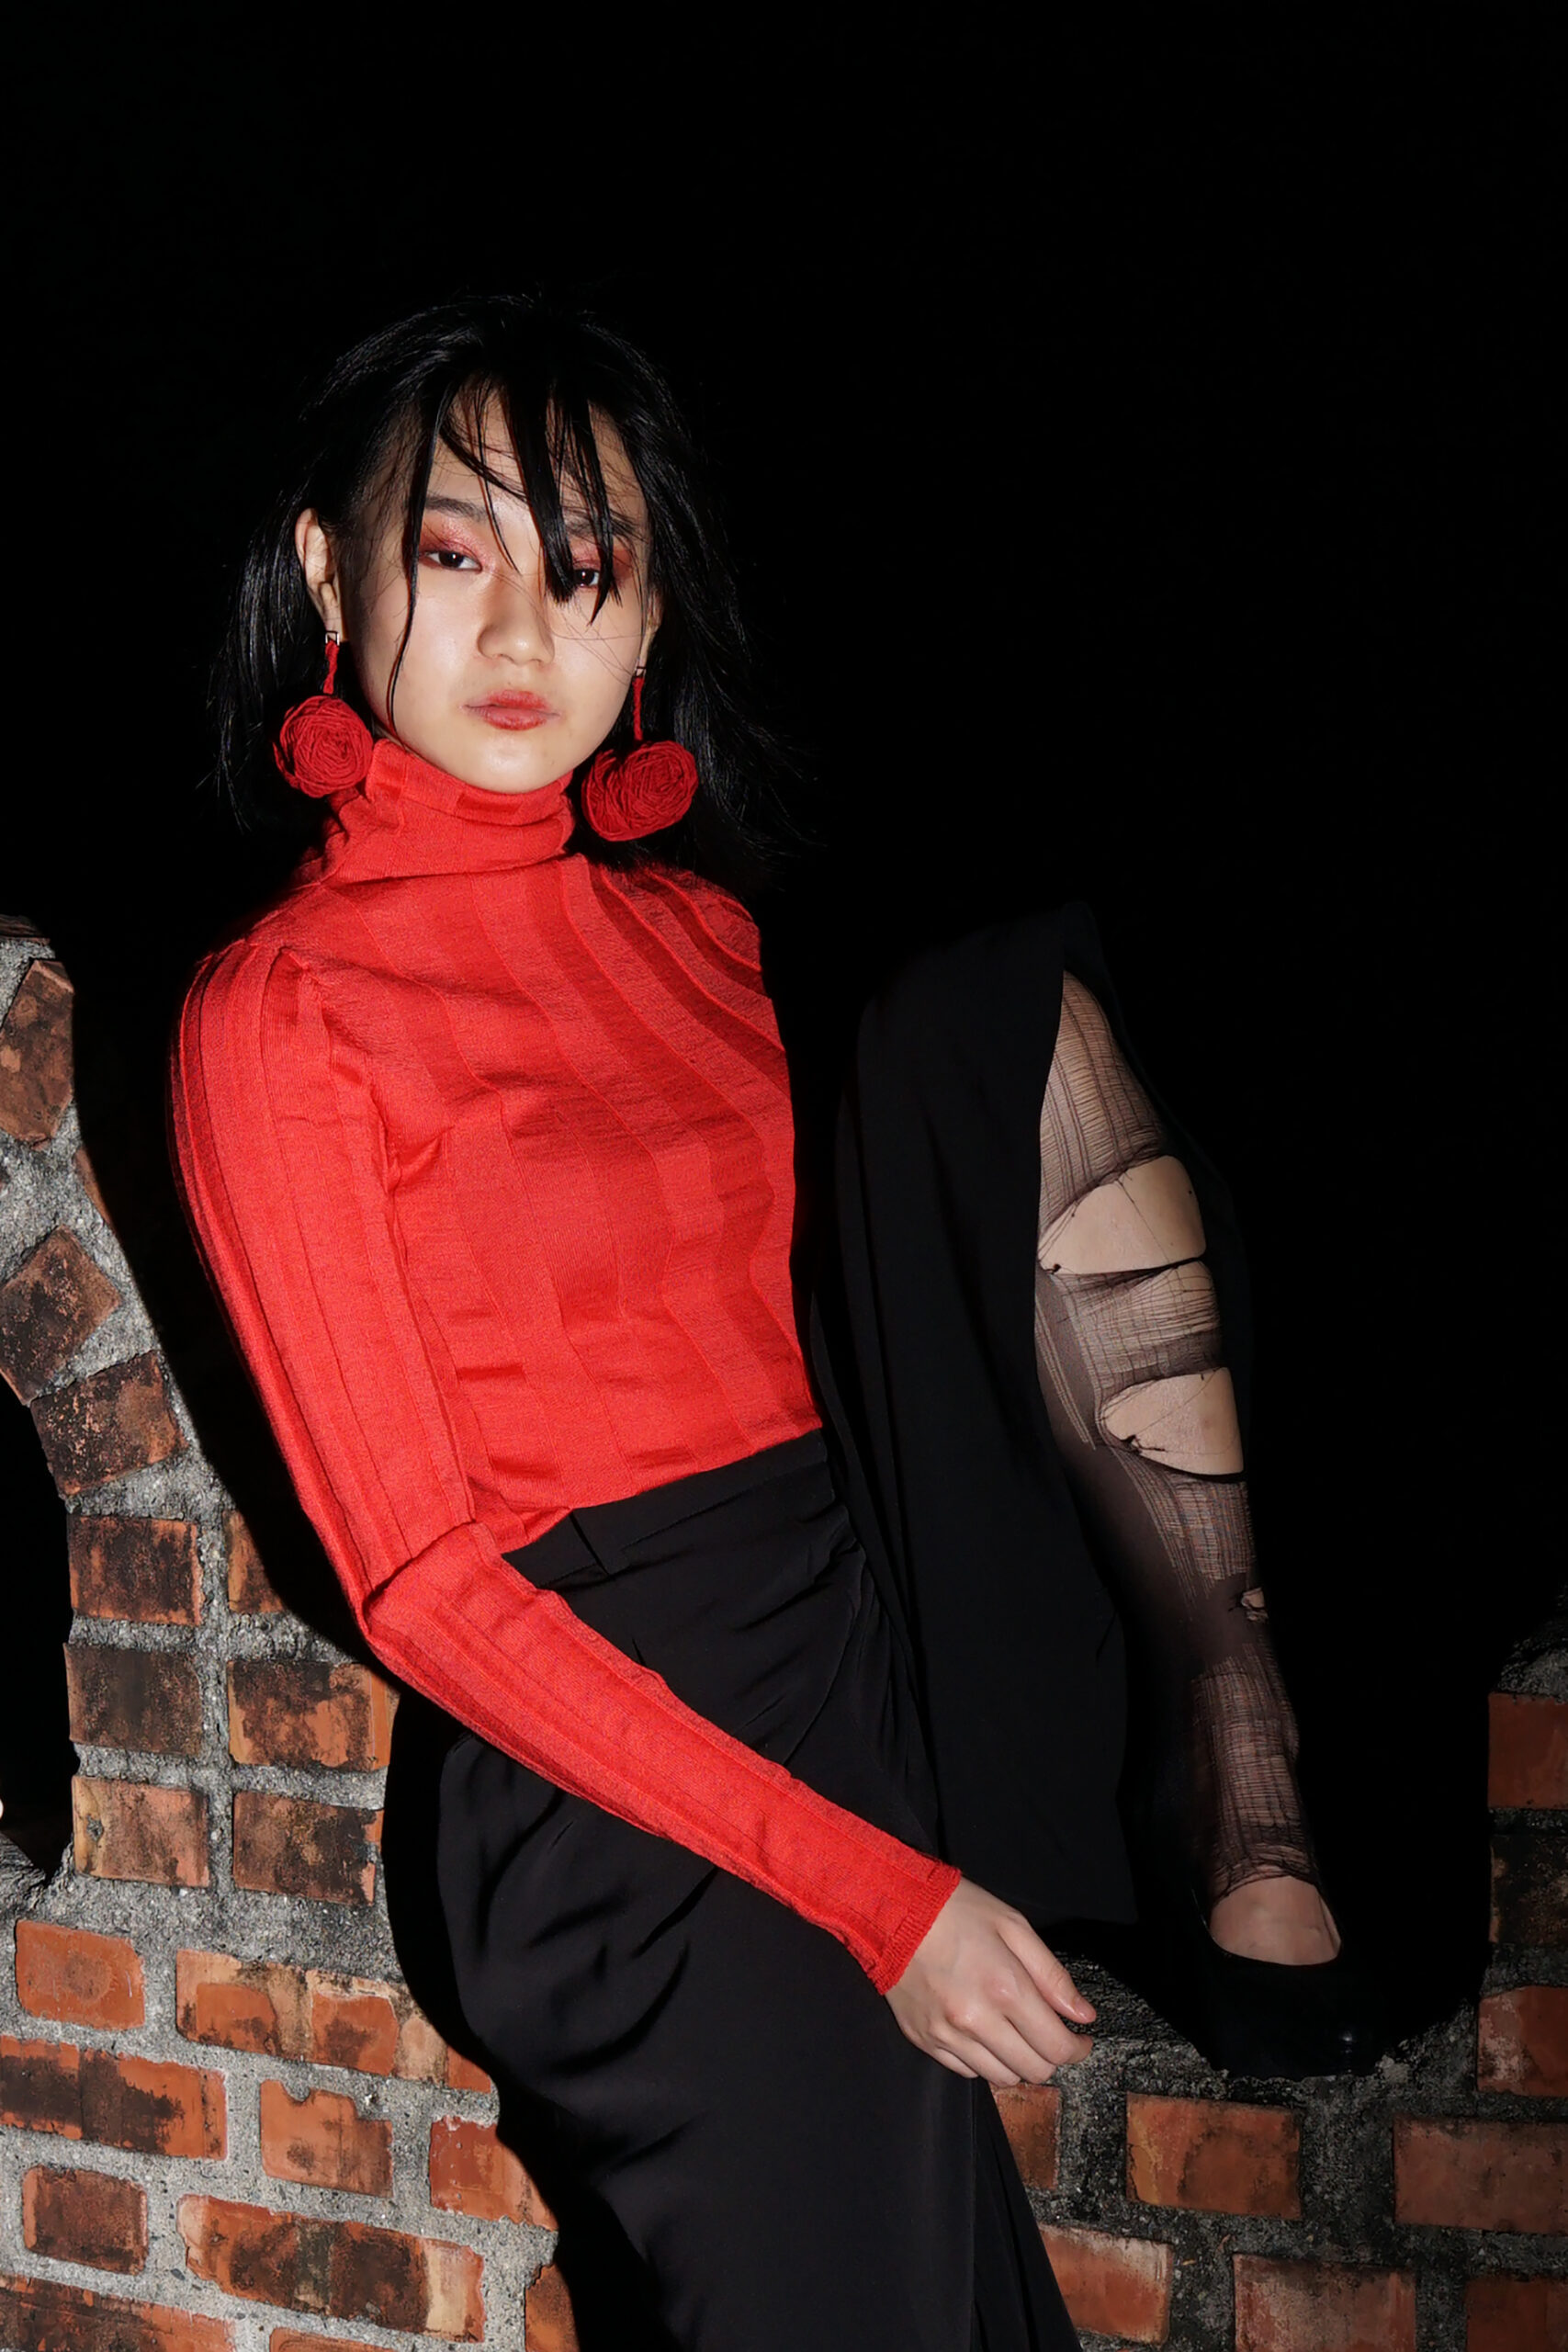 Portrait of girl sitting on a brick ledge with classic trousers and torn nylons, red turtle neck and bundle of yarn earings